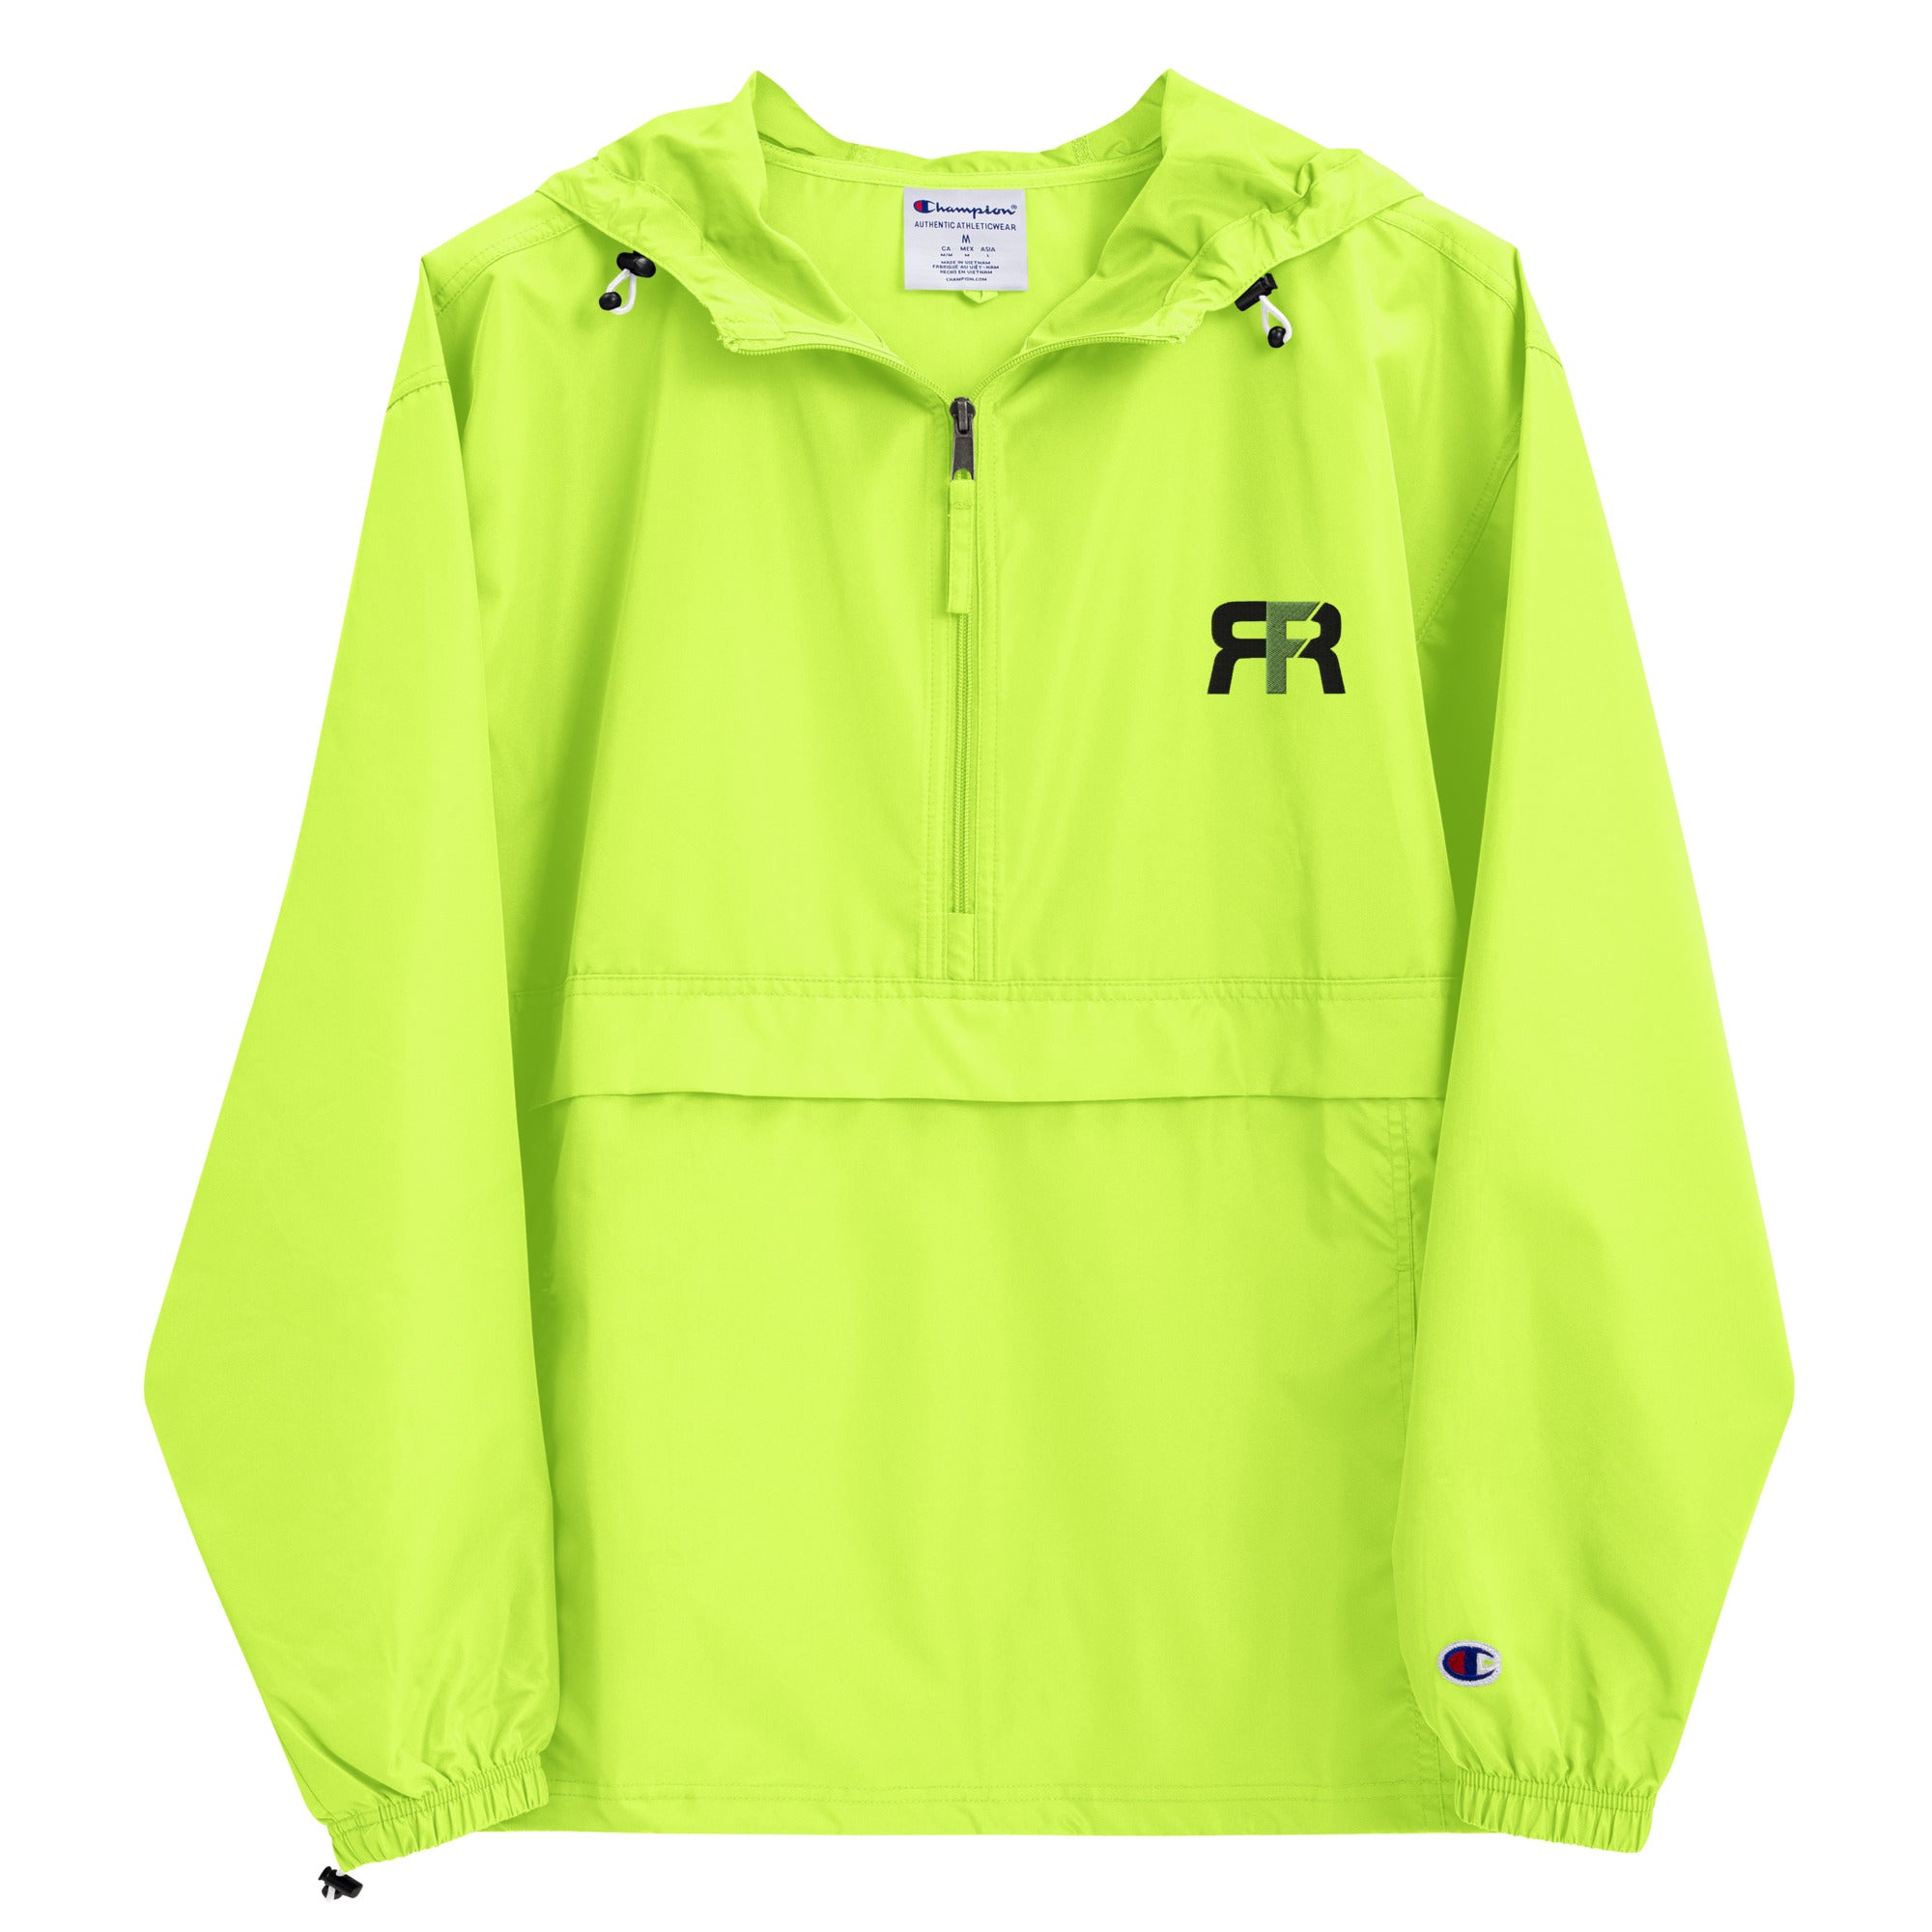 RFR Packable Jacket